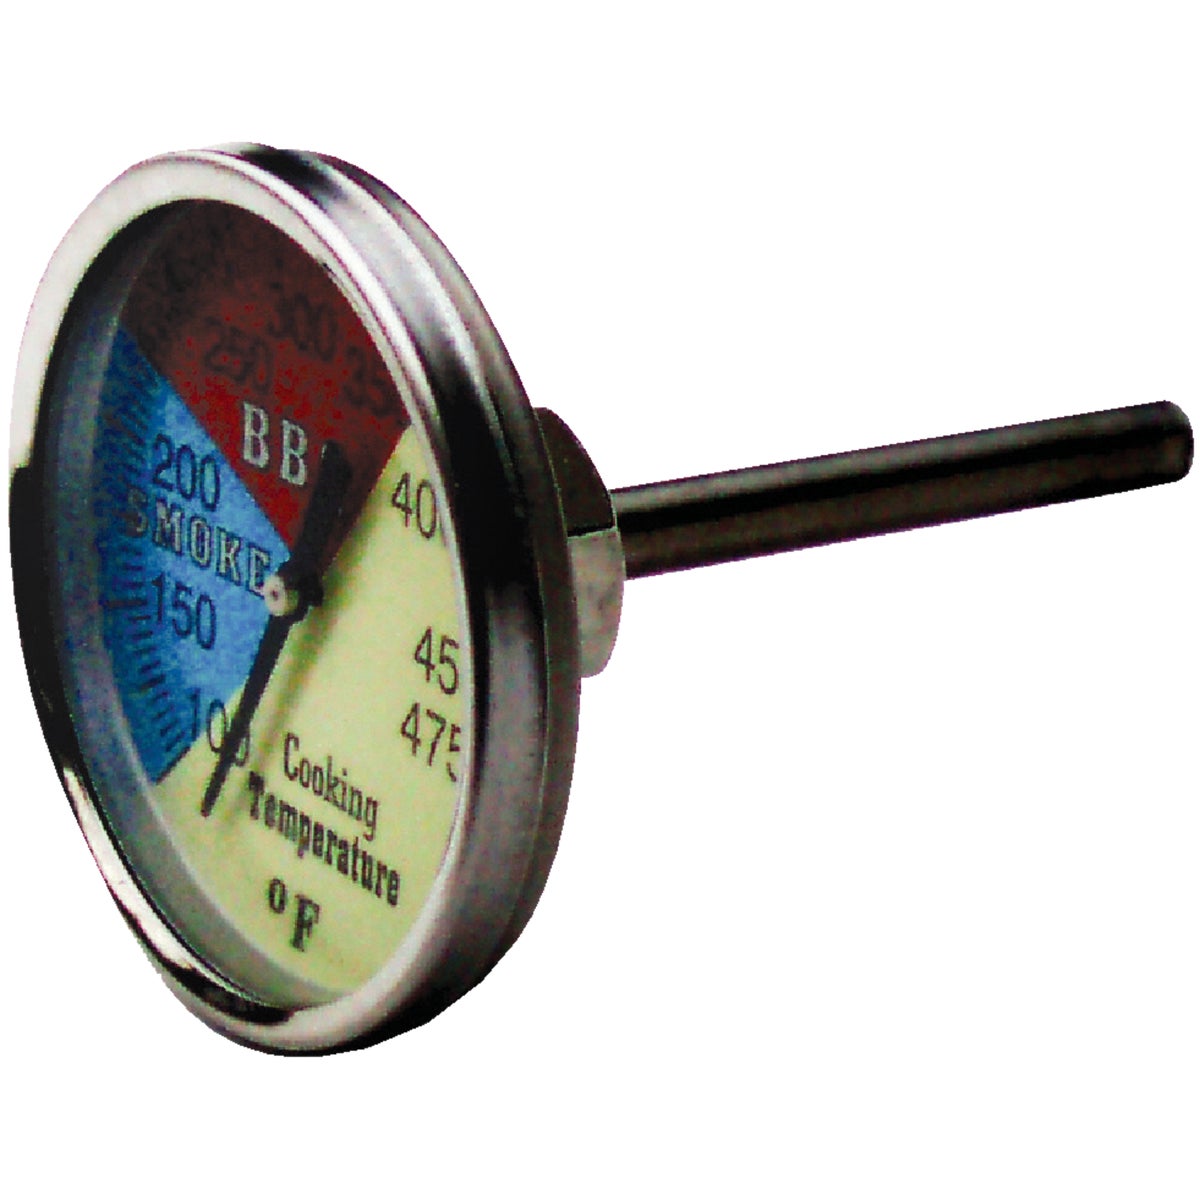 Item 800535, Temperature gauge to attach to Old Smokey charcoal grills.